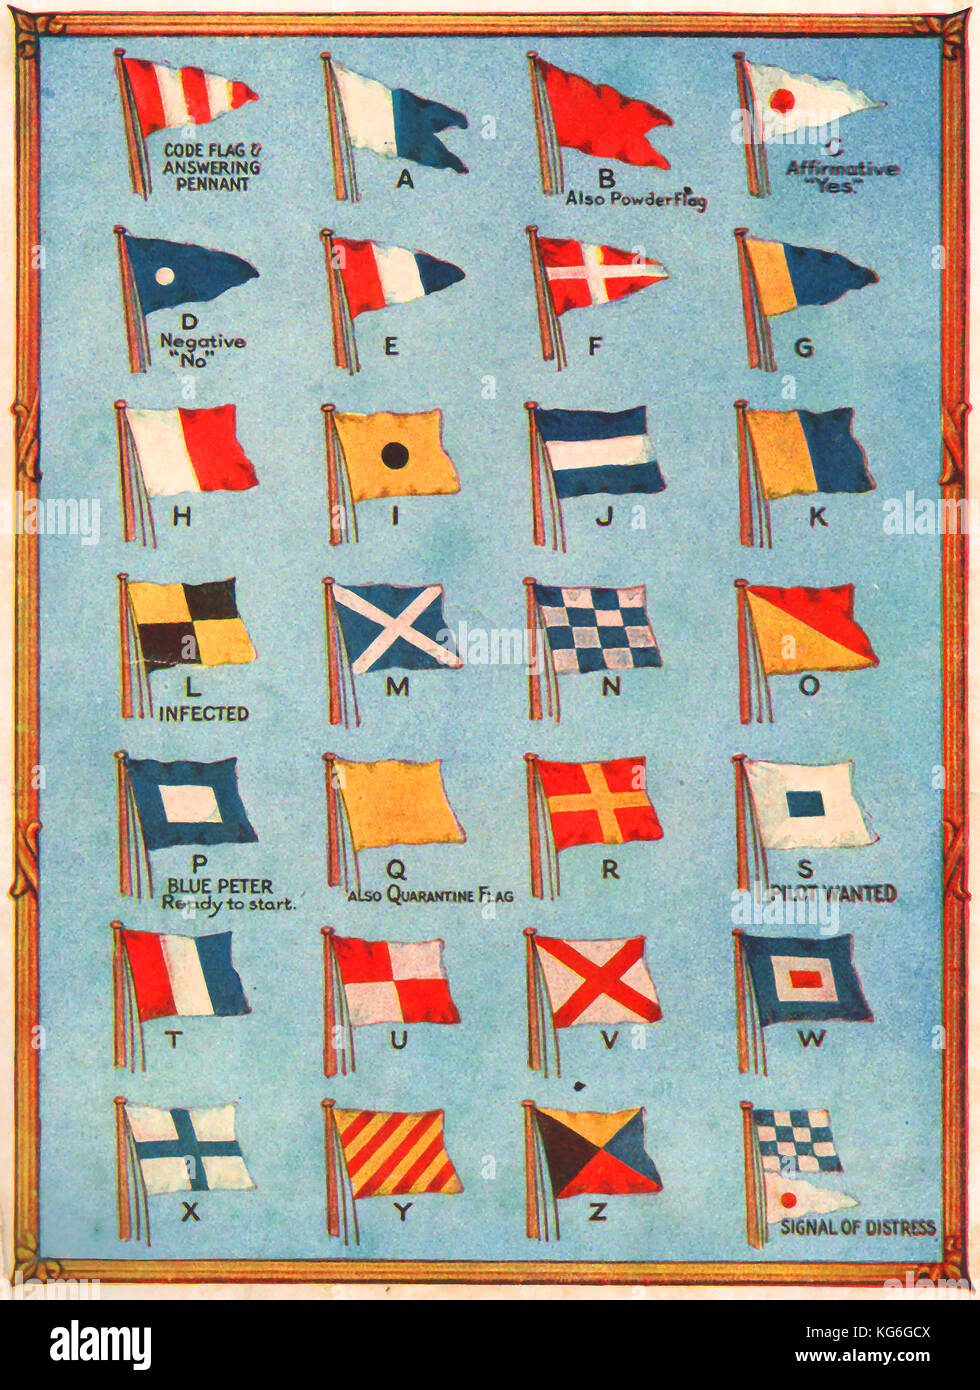 Naval Signal Flags High Resolution Stock Photography and Images - Alamy